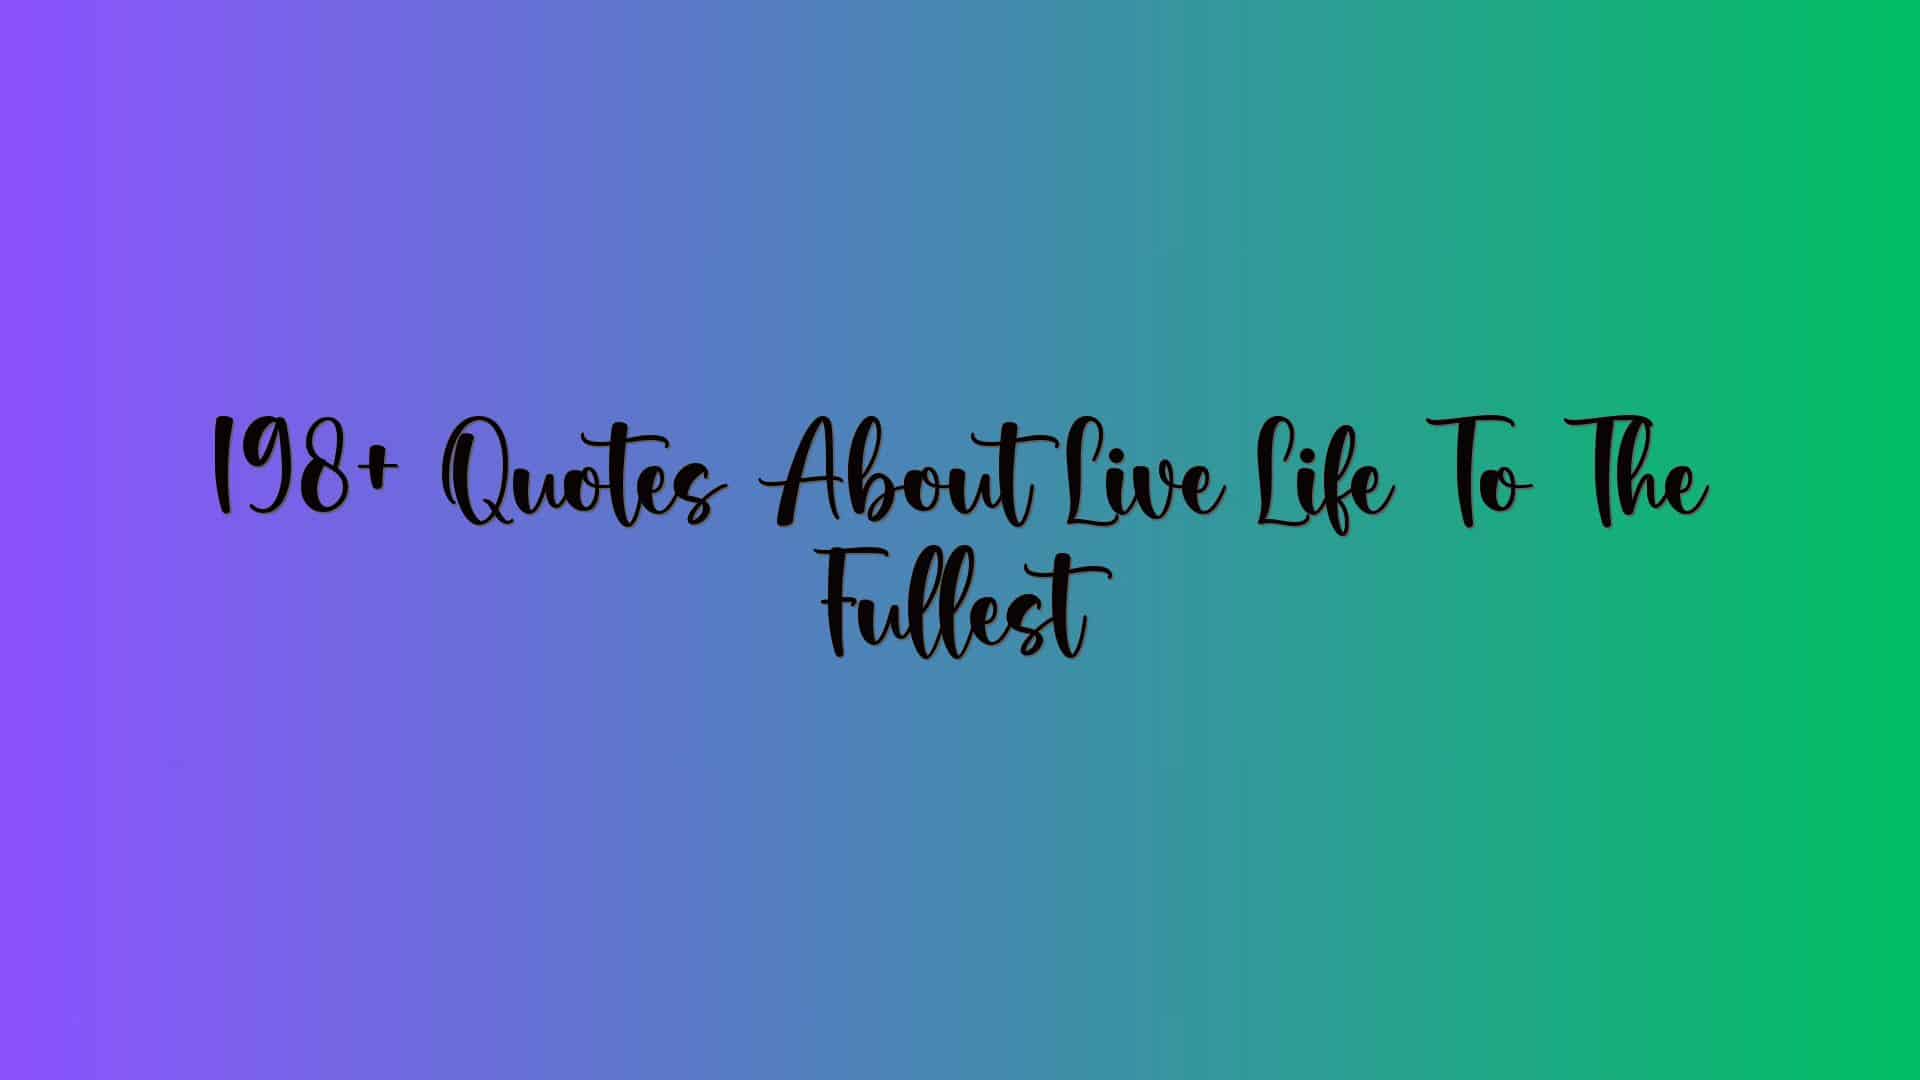 198+ Quotes About Live Life To The Fullest